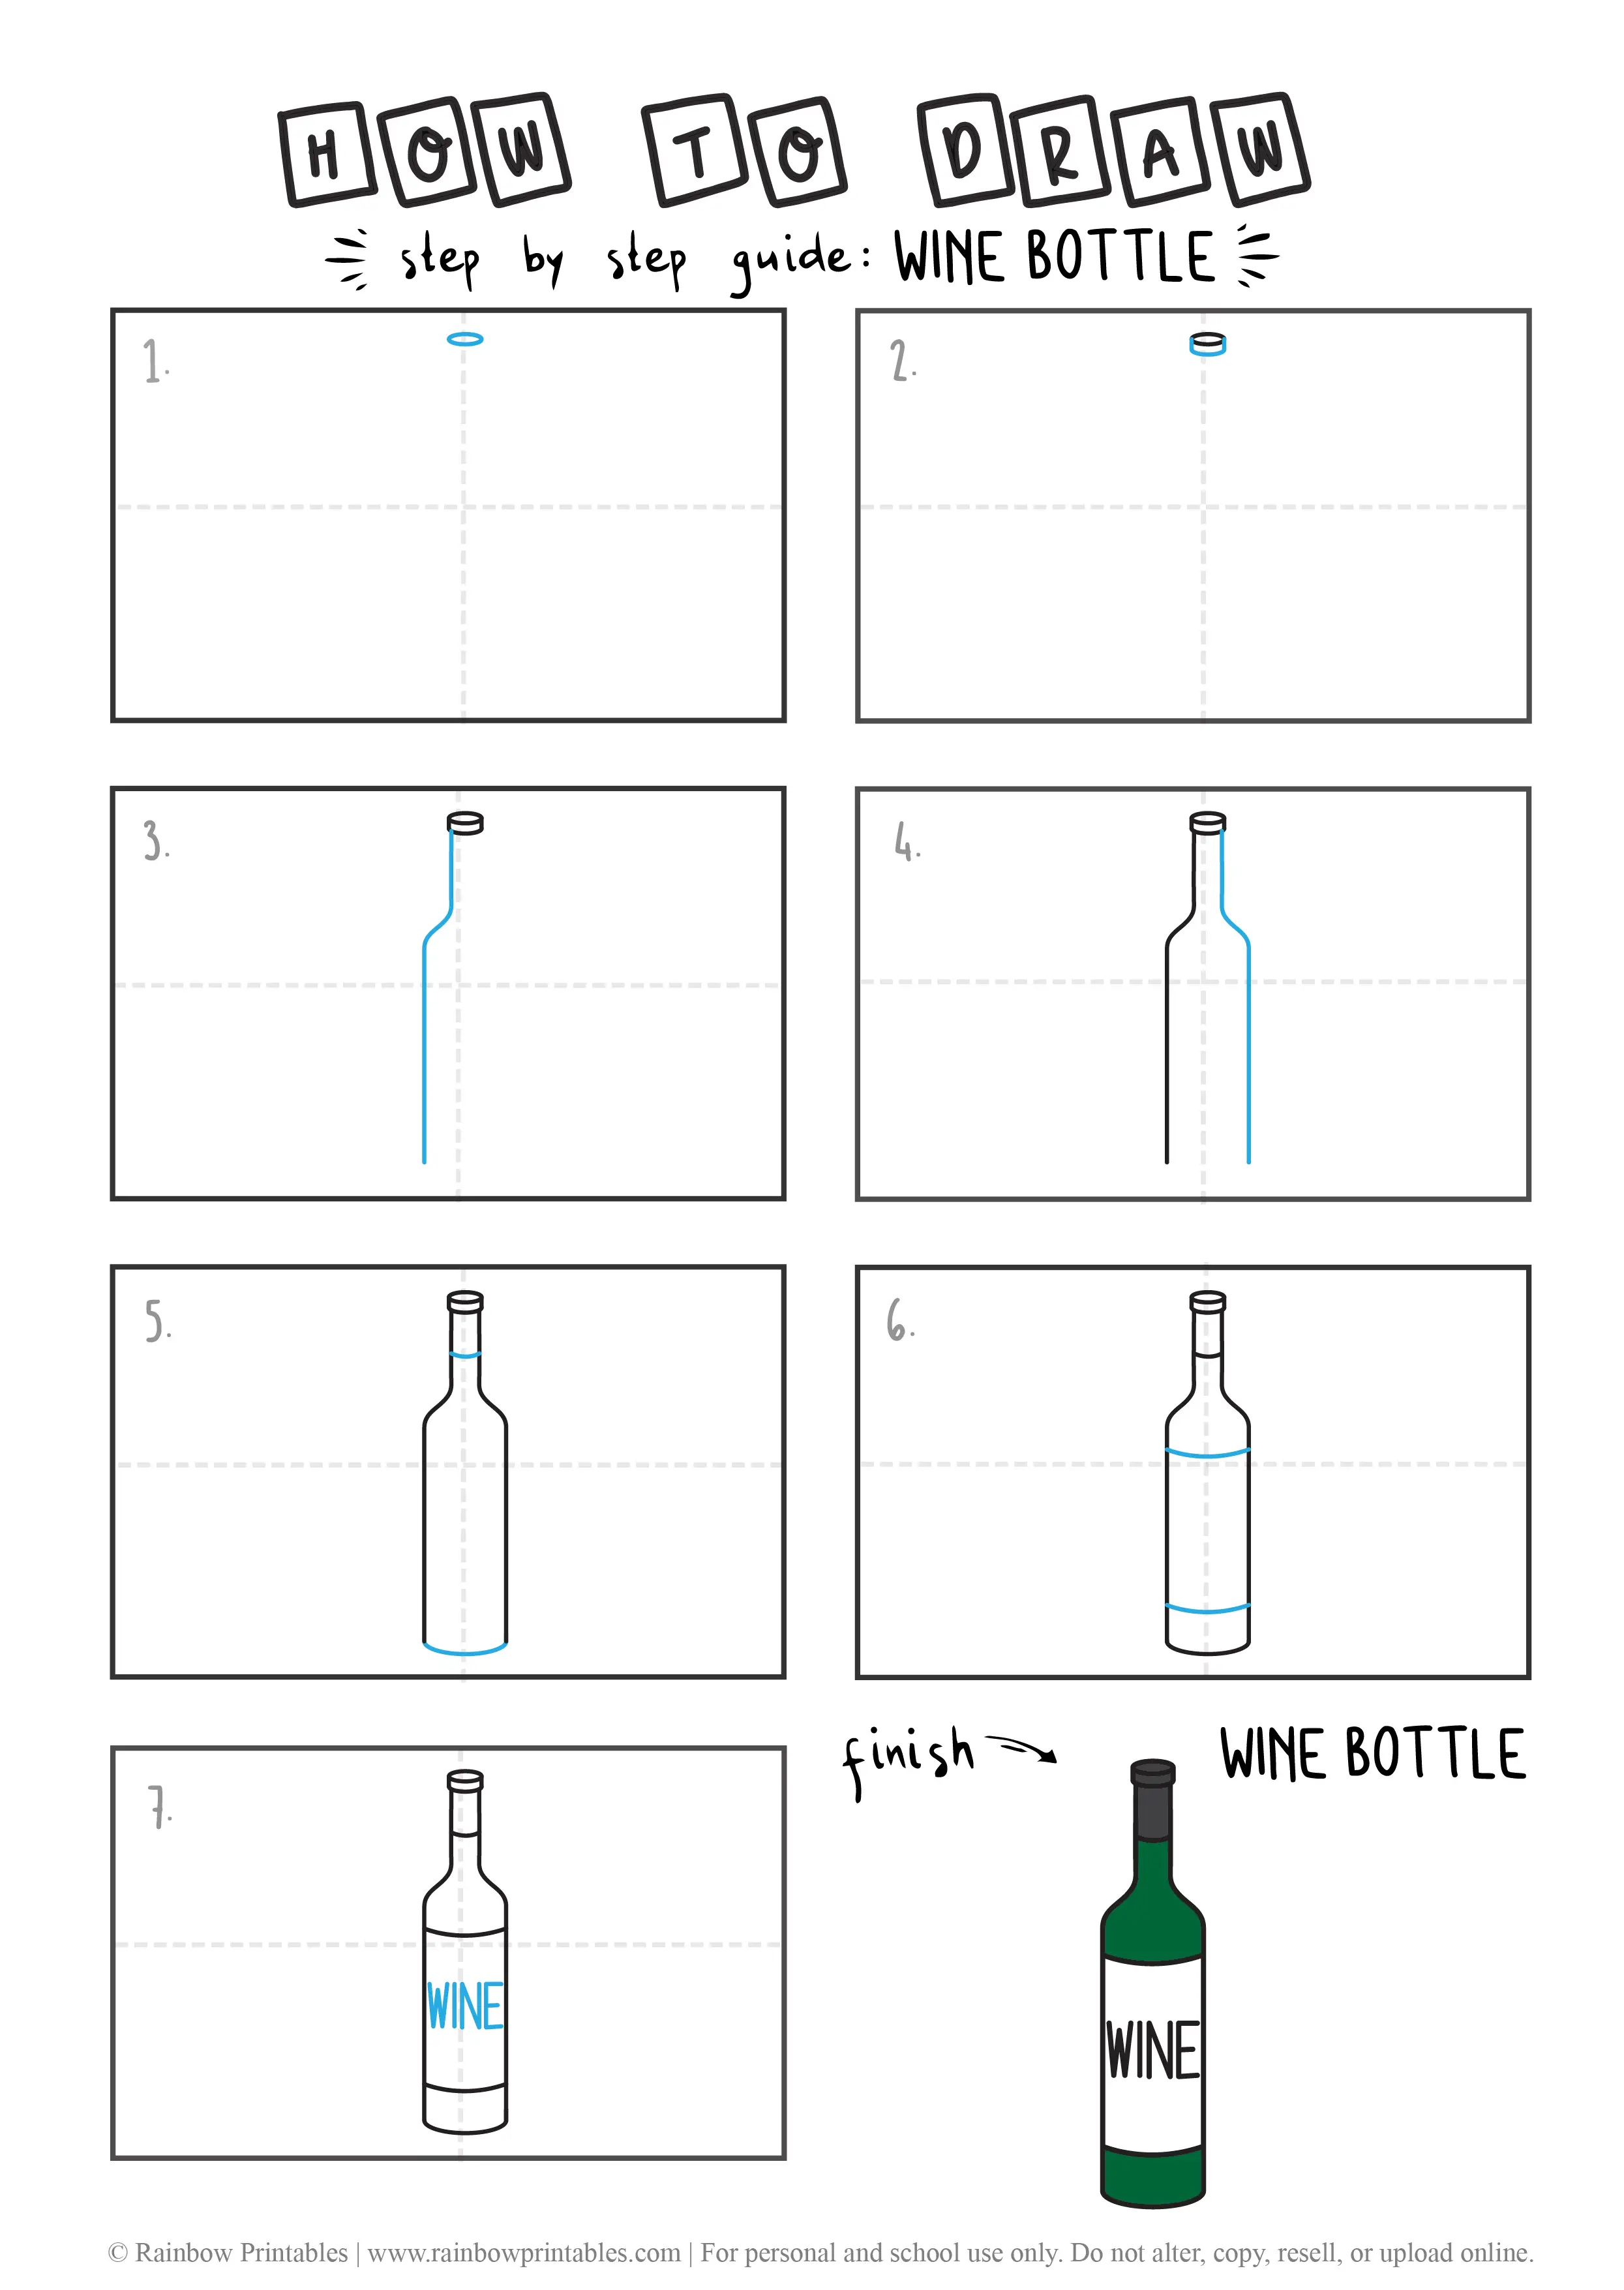 HOW TO DRAW WINE BOTTLE LIQUOR GUIDE ILLUSTRATION STEP BY STEP EASY SIMPLE FOR KIDS